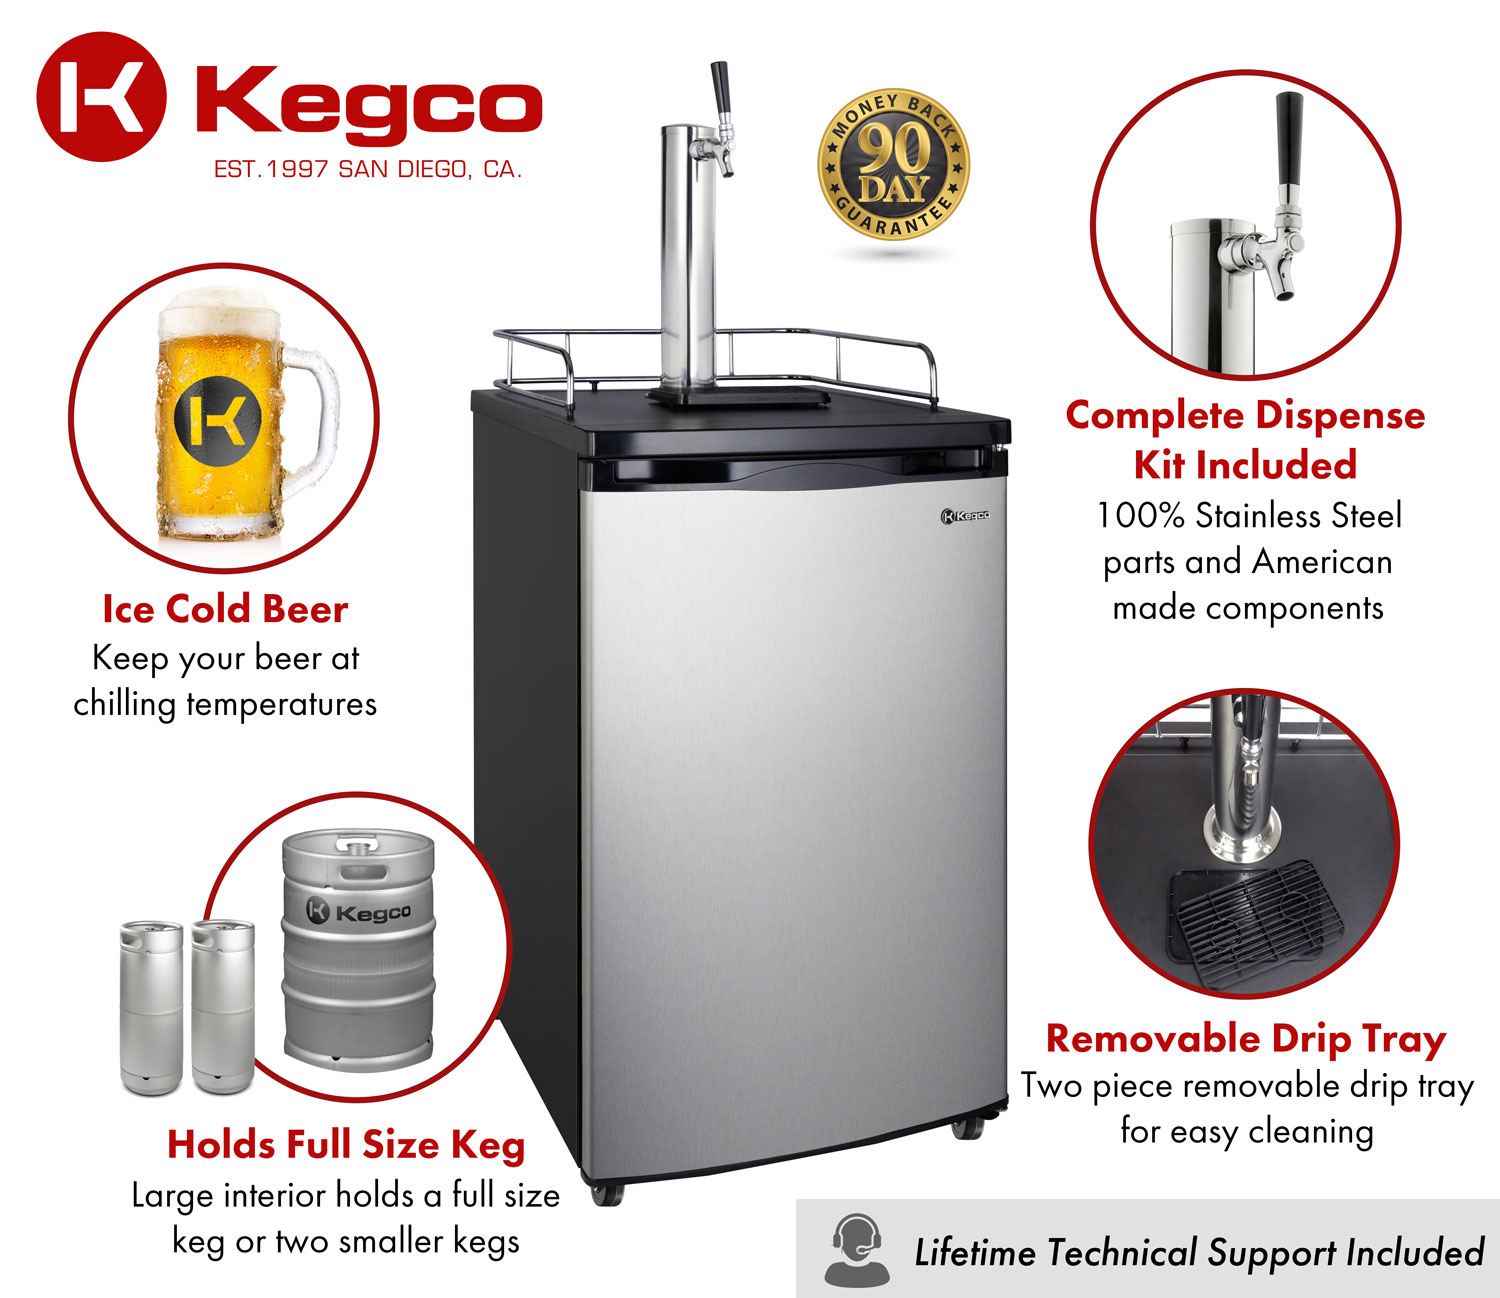 All stainless contact single tap dispense system includes tower, regulator, keg coupler, and CO2 tank